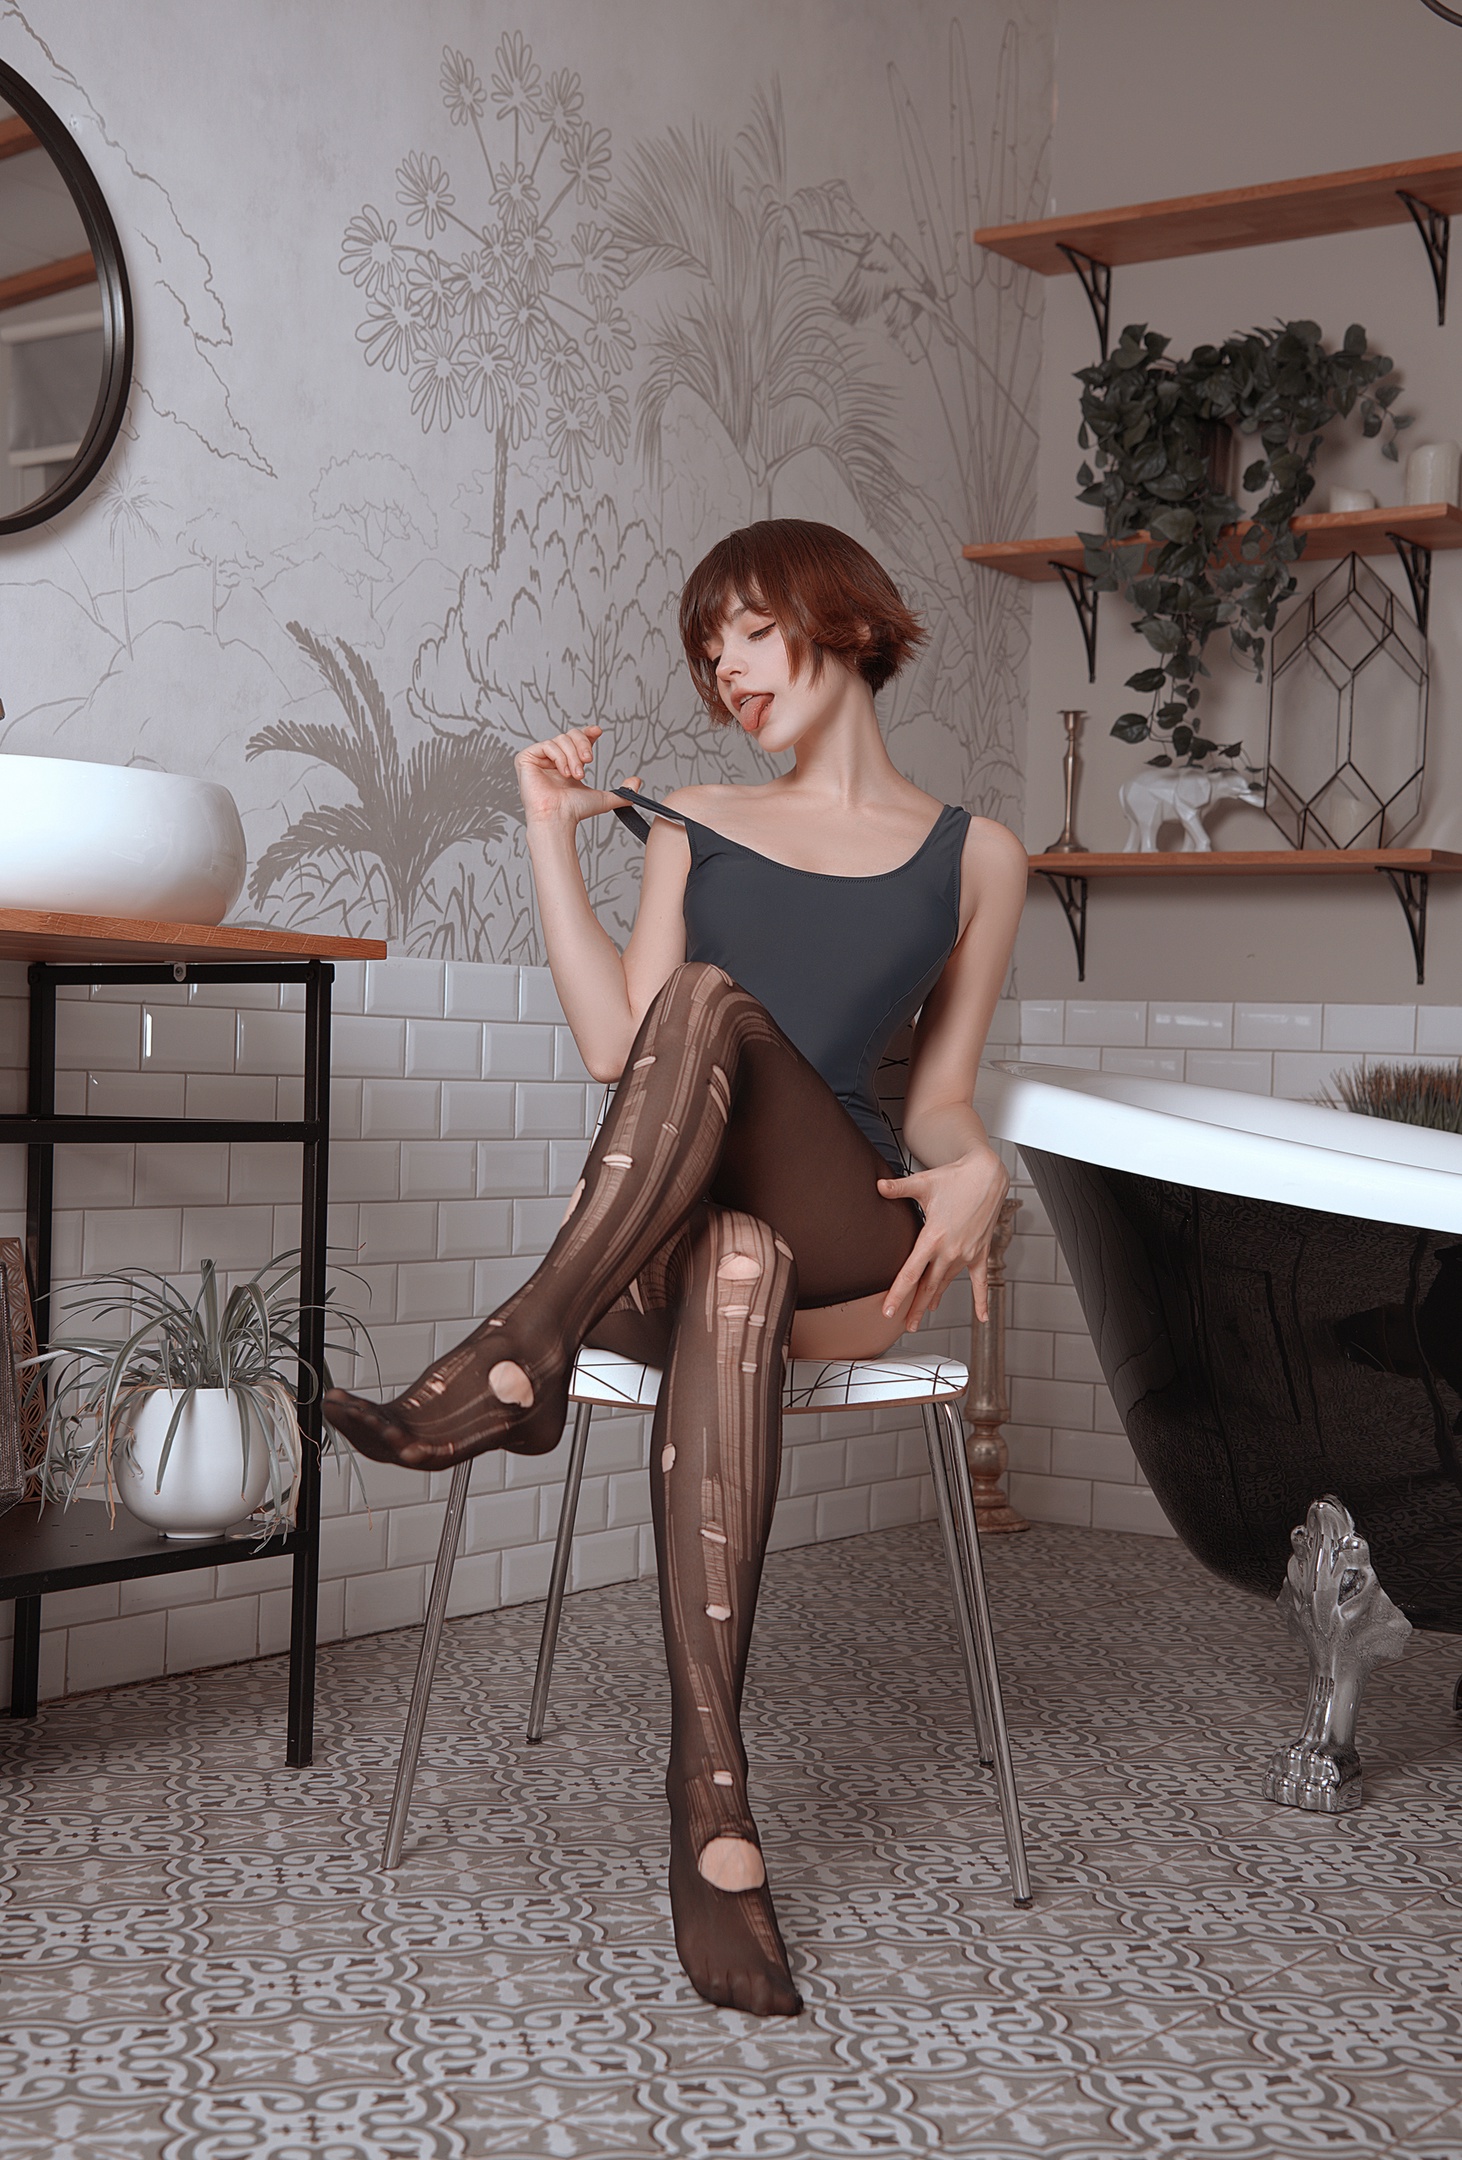 People 1462x2160 Karina Salakhutdinova women redhead short hair lingerie torn pantyhose legs crossed chair tongue out tongues legs pantyhose pulling clothing women in bathroom model pointed toes